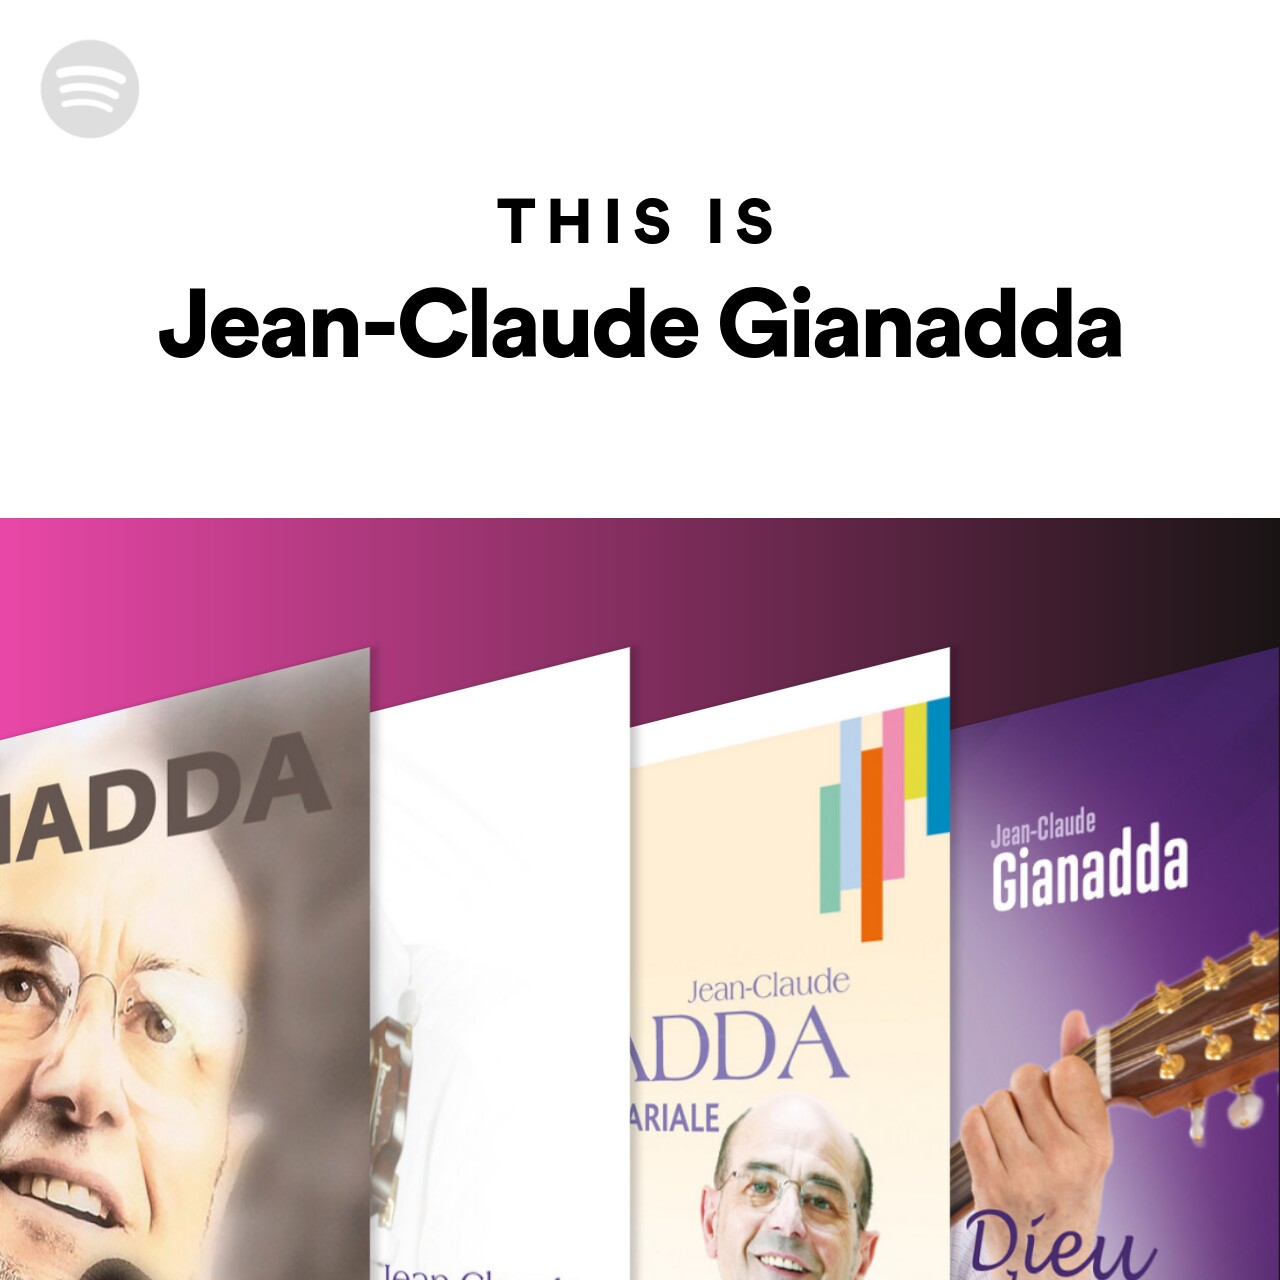 This Is Jean-Claude Gianadda